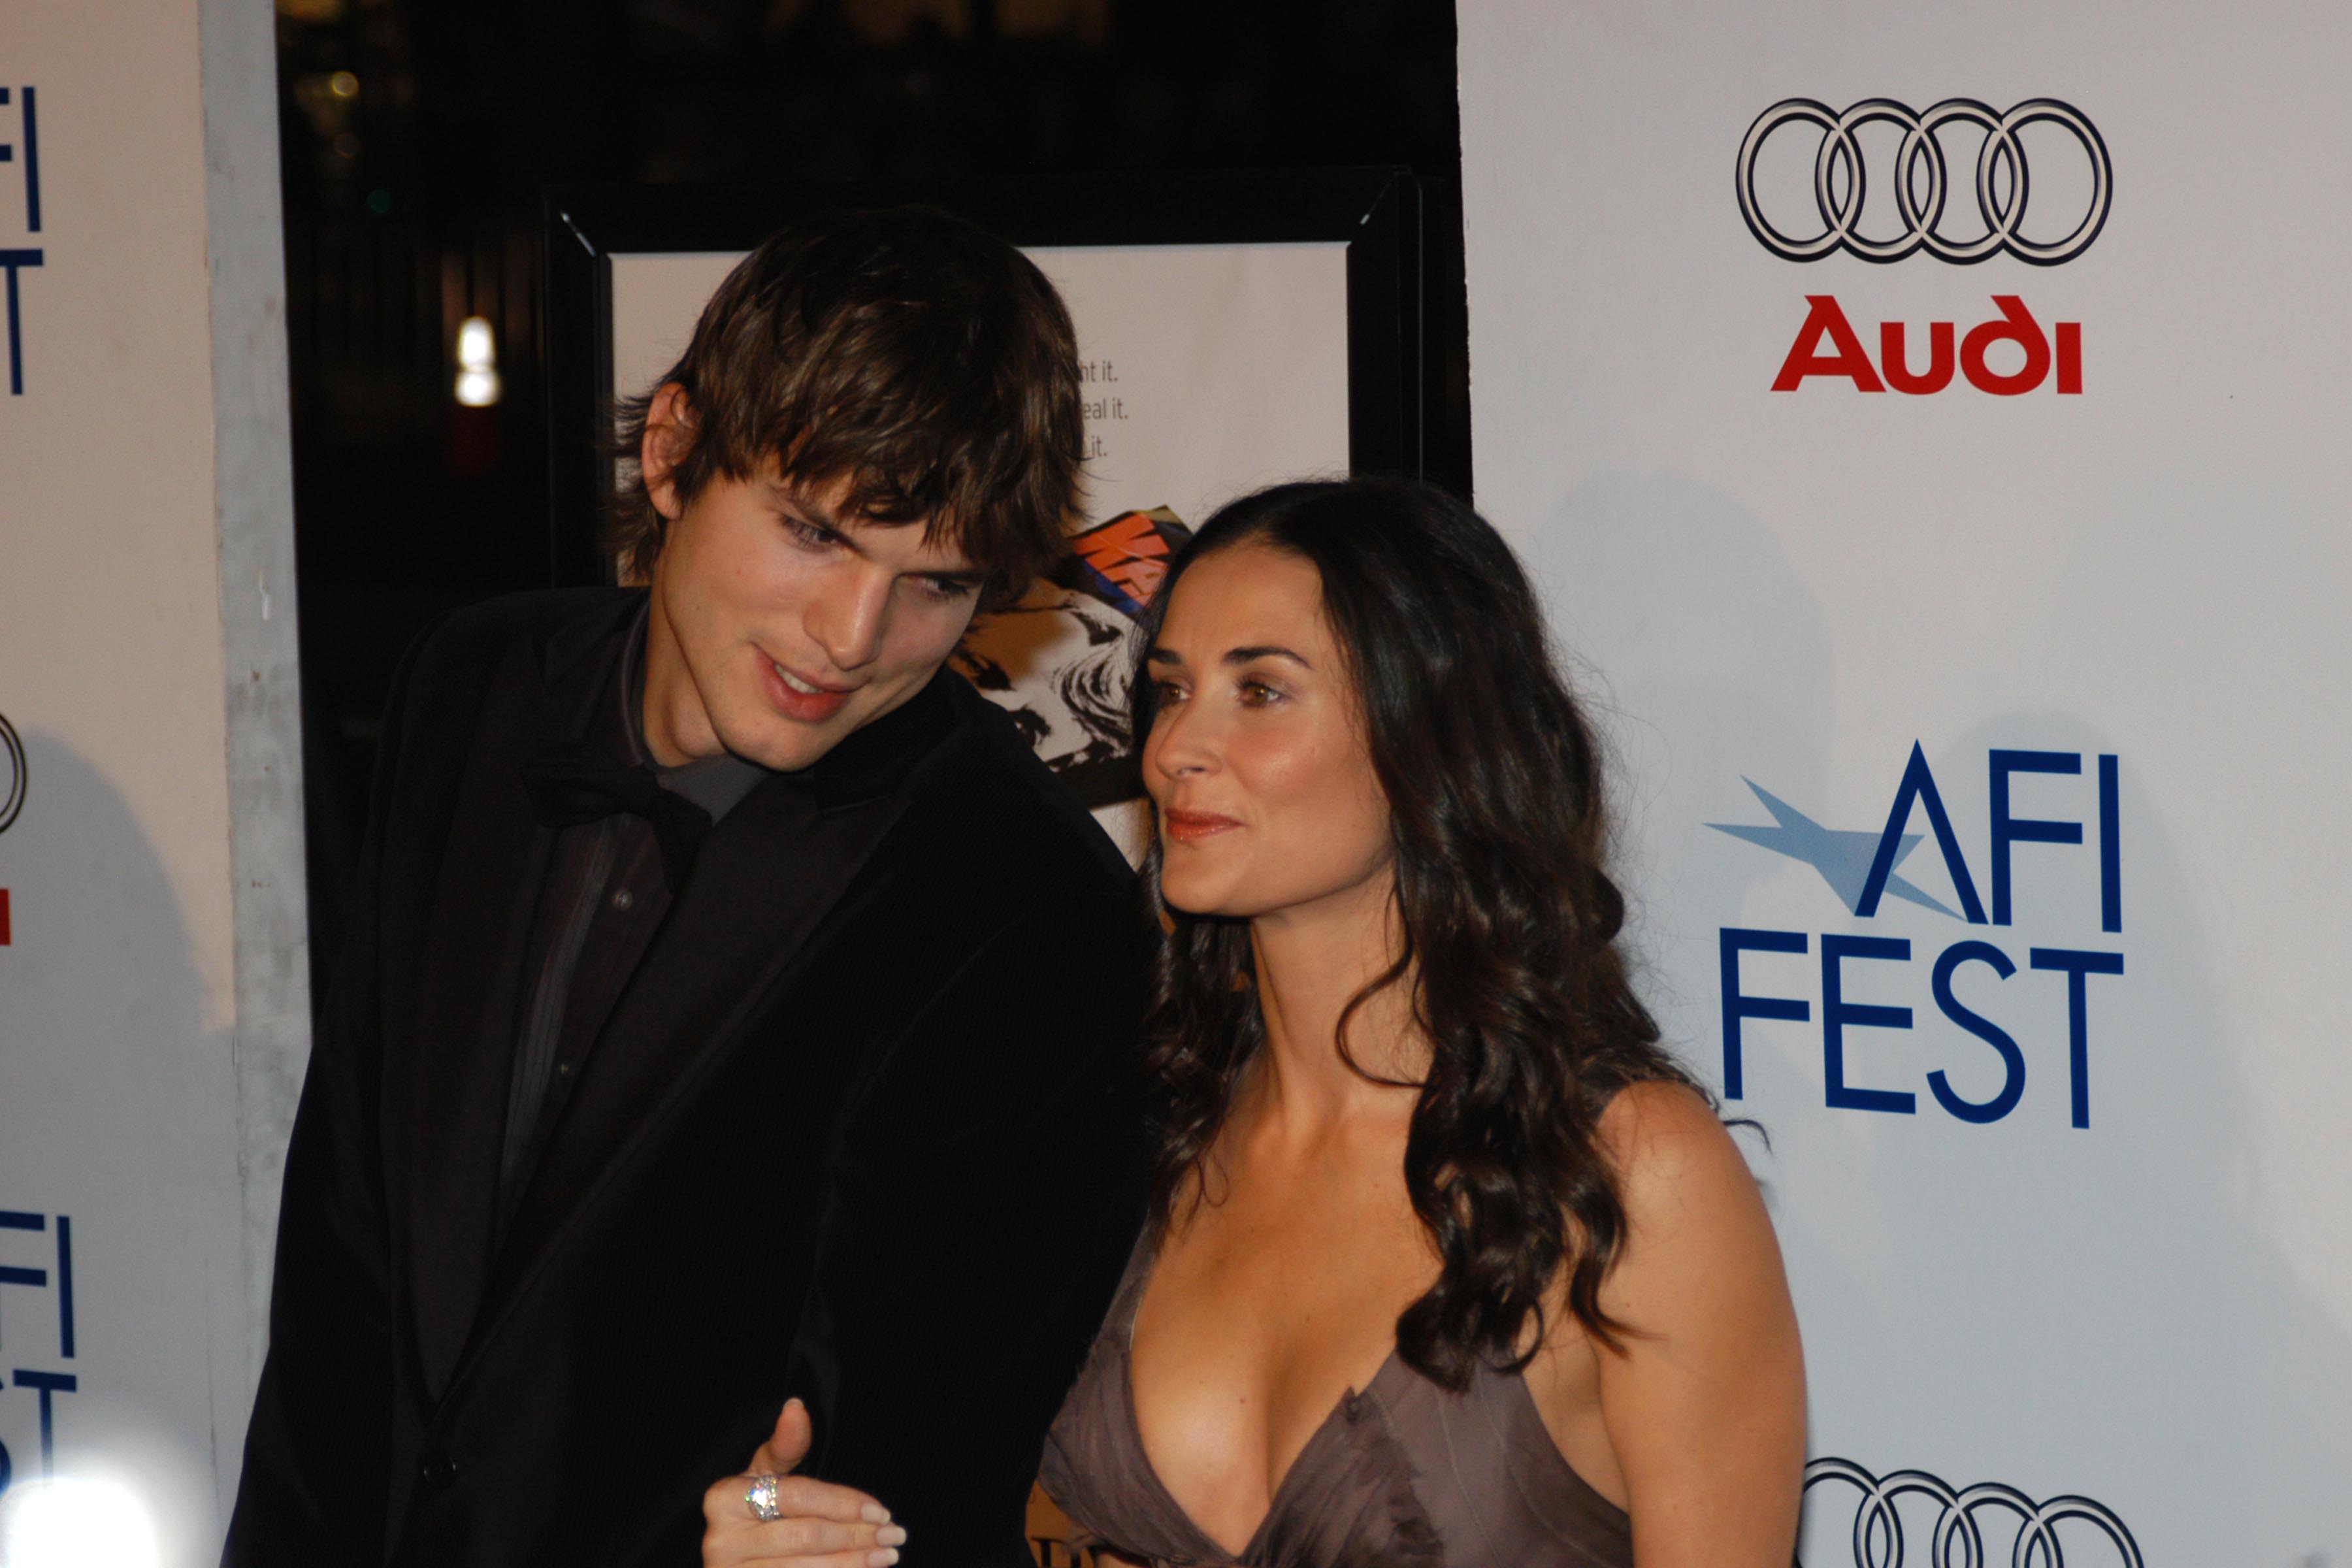 Ashton Kutcher and Demi Moore attend AFI Fest 2006 Host Gala and Premiere of Emilio Estevez's "Bobby" at Grauman's Chinese Theater on November 1, 2006 in Hollywood California | Source: Getty Images